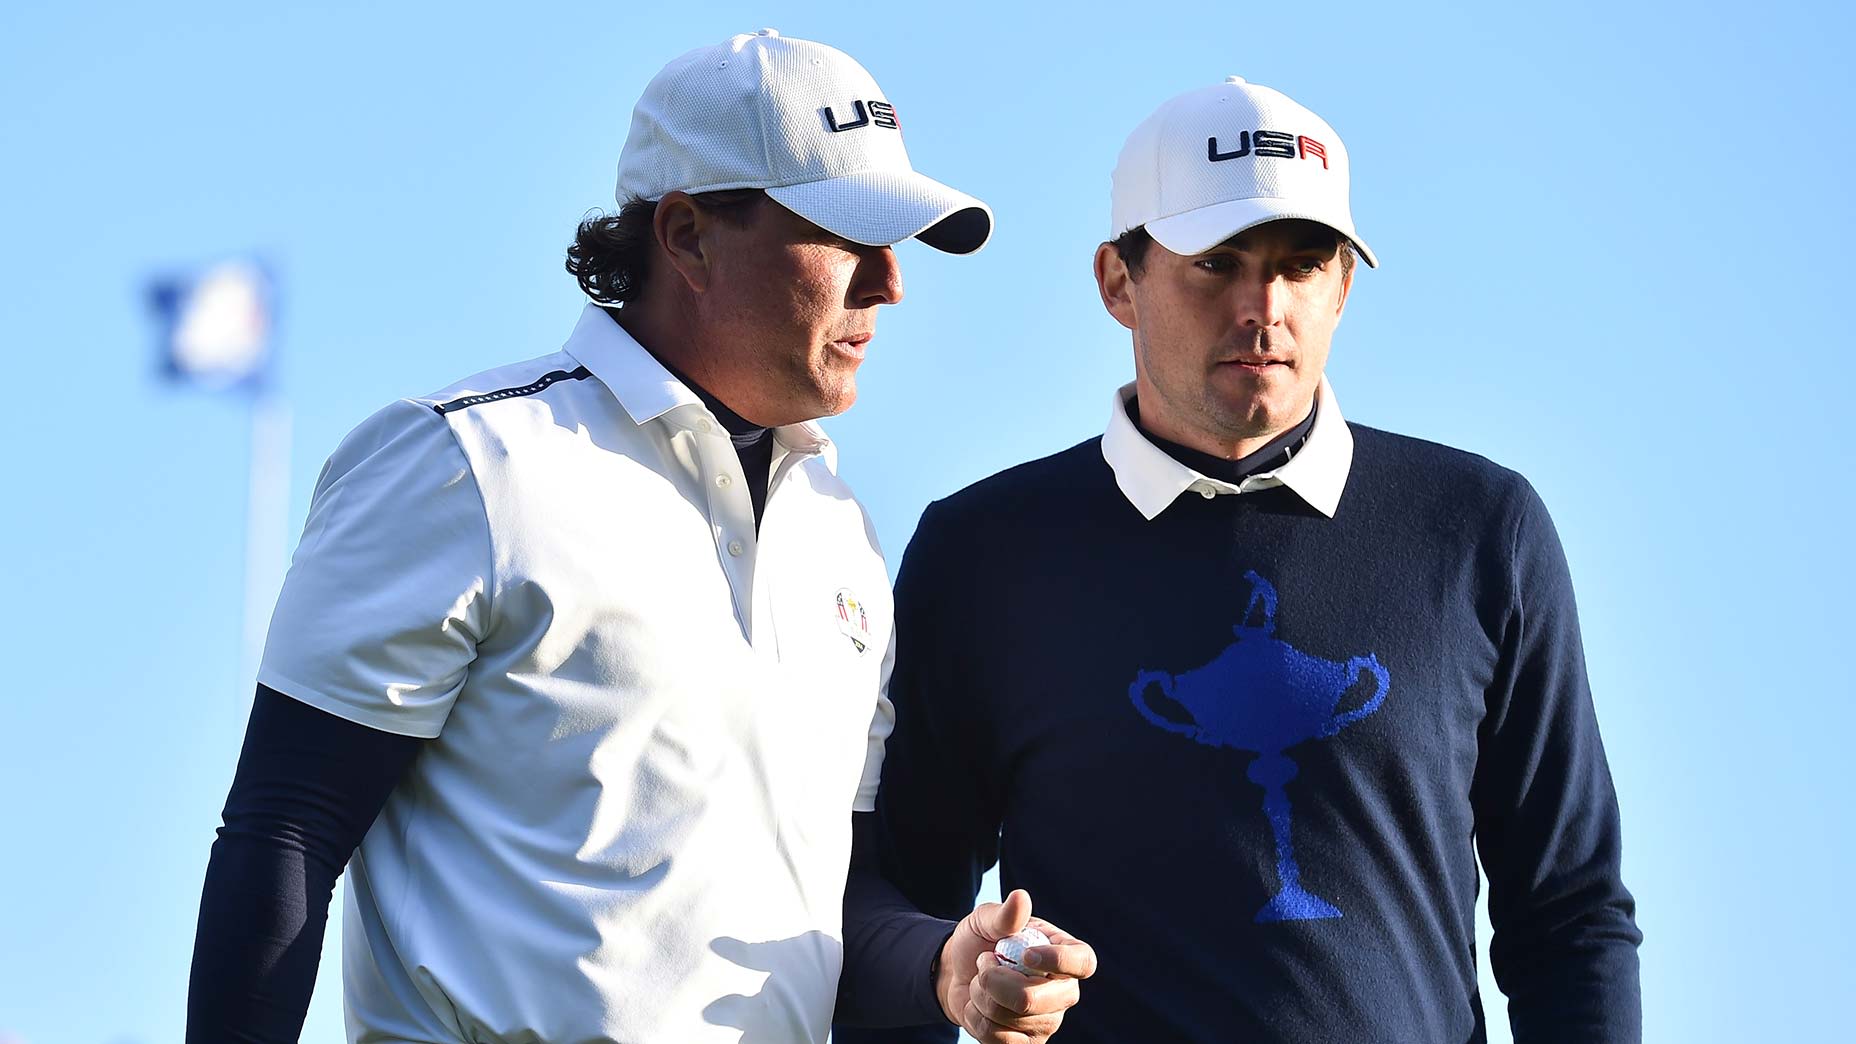 Will Phil Mickelson have a Ryder Cup role? Here's what Keegan Bradley says